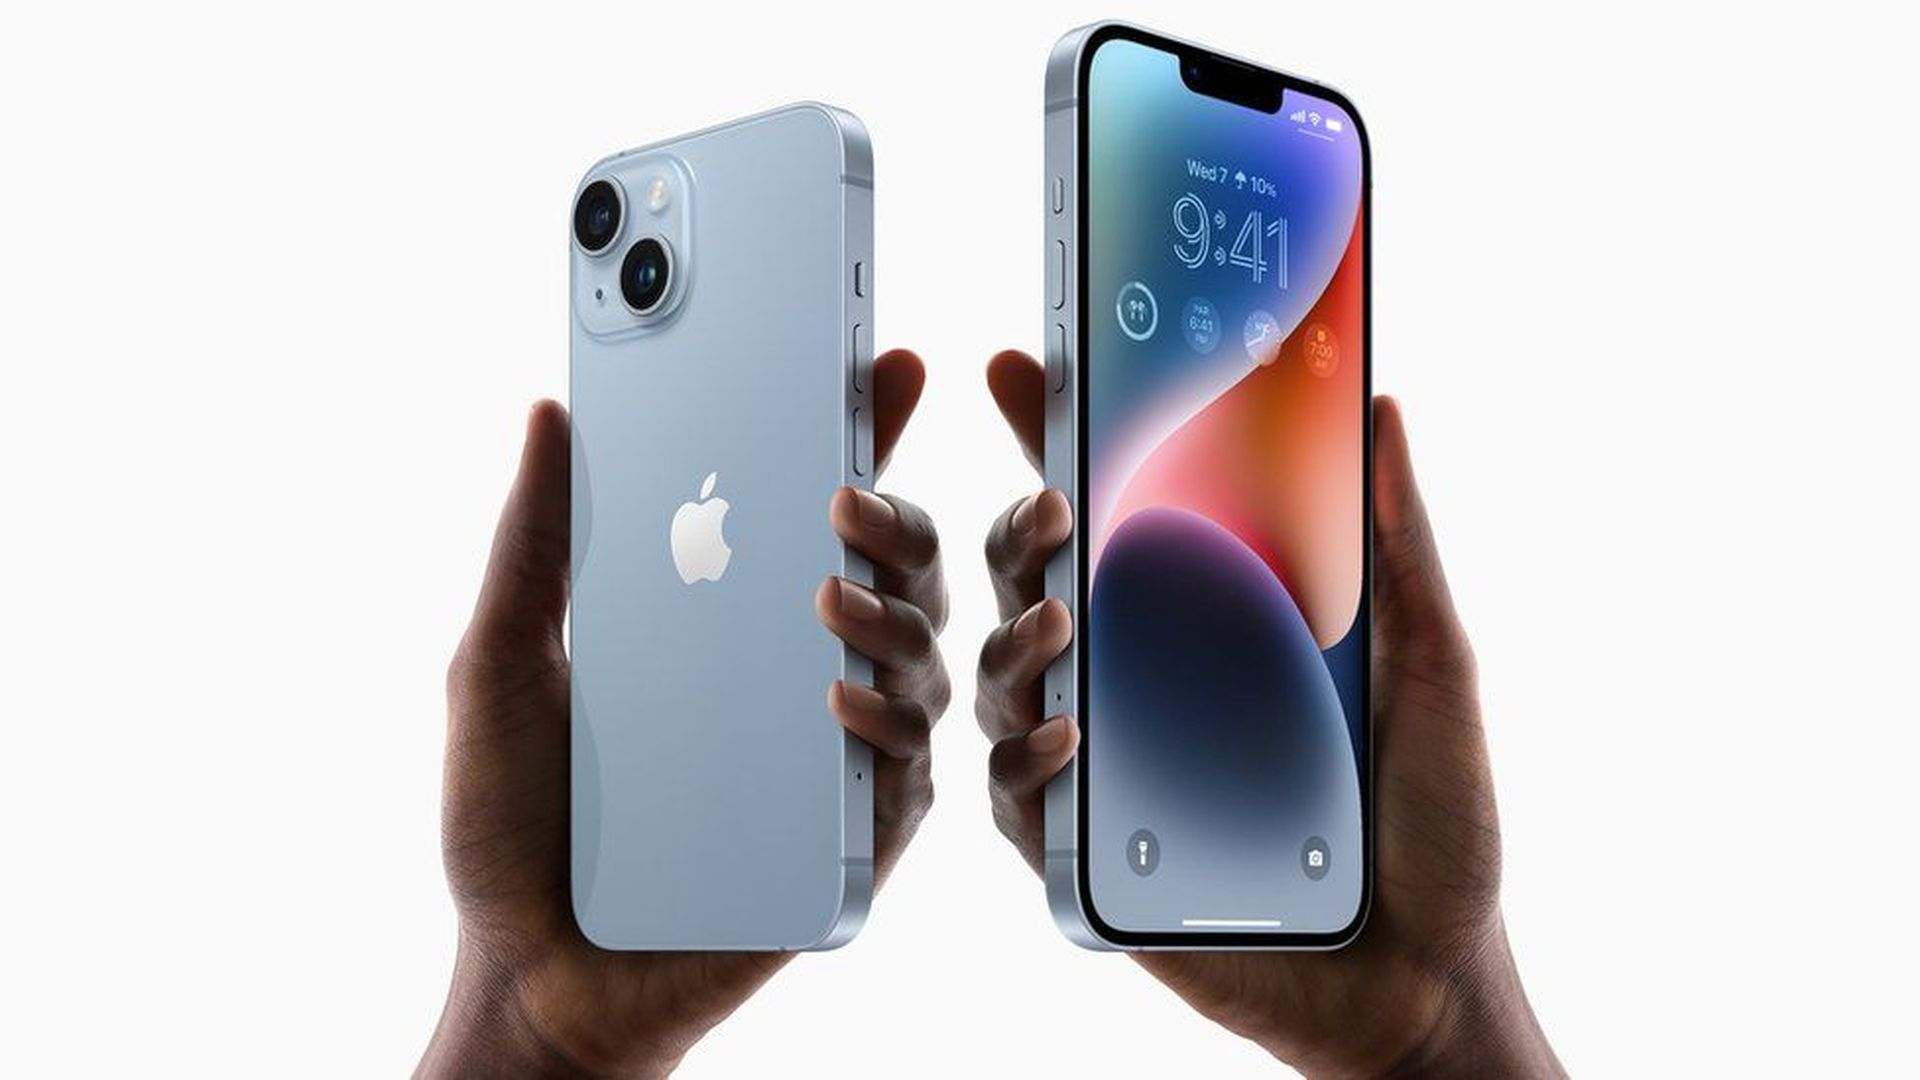 Now that the iPhone 14 lineup has been revealed, let's take a look at iPhone 14 Pro Max vs iPhone 13 Pro Max and how they compare.